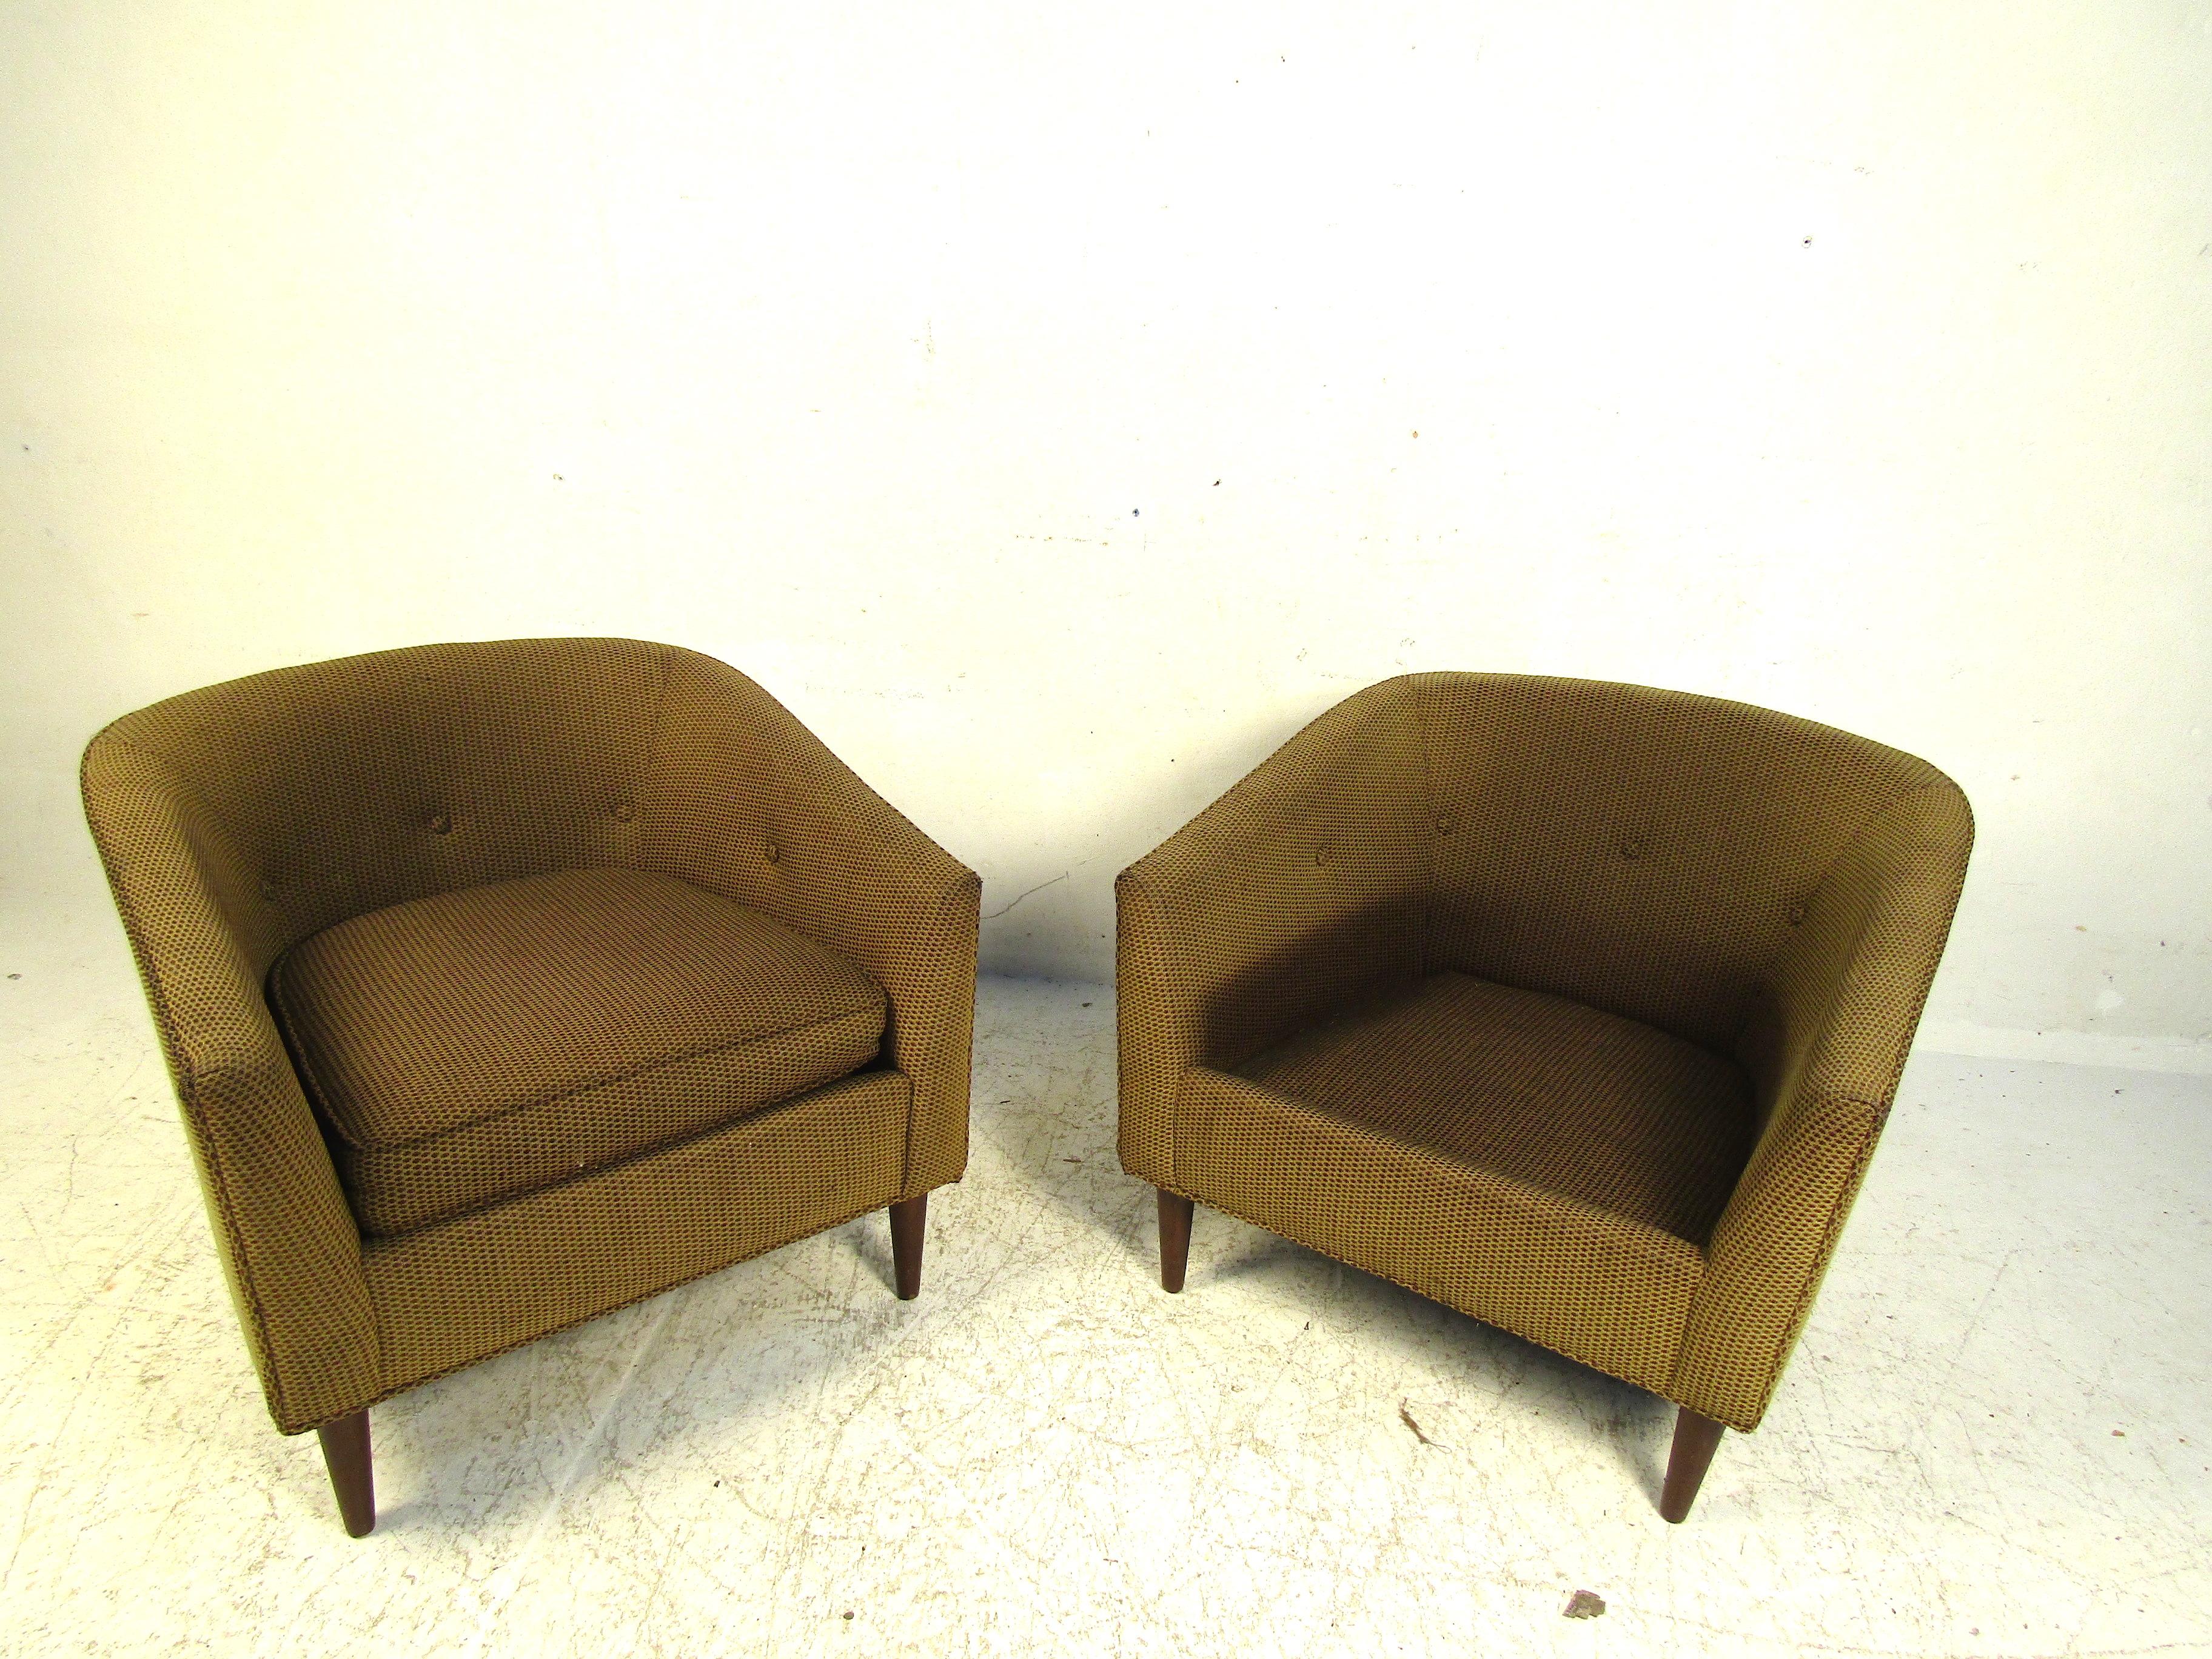 This pair of dark green lounge chairs feature a deep comfortable backset making them a perfect addition to any home office or library setup. Simple and clean design this set will add a flare of life to your space without being overbearing. Please